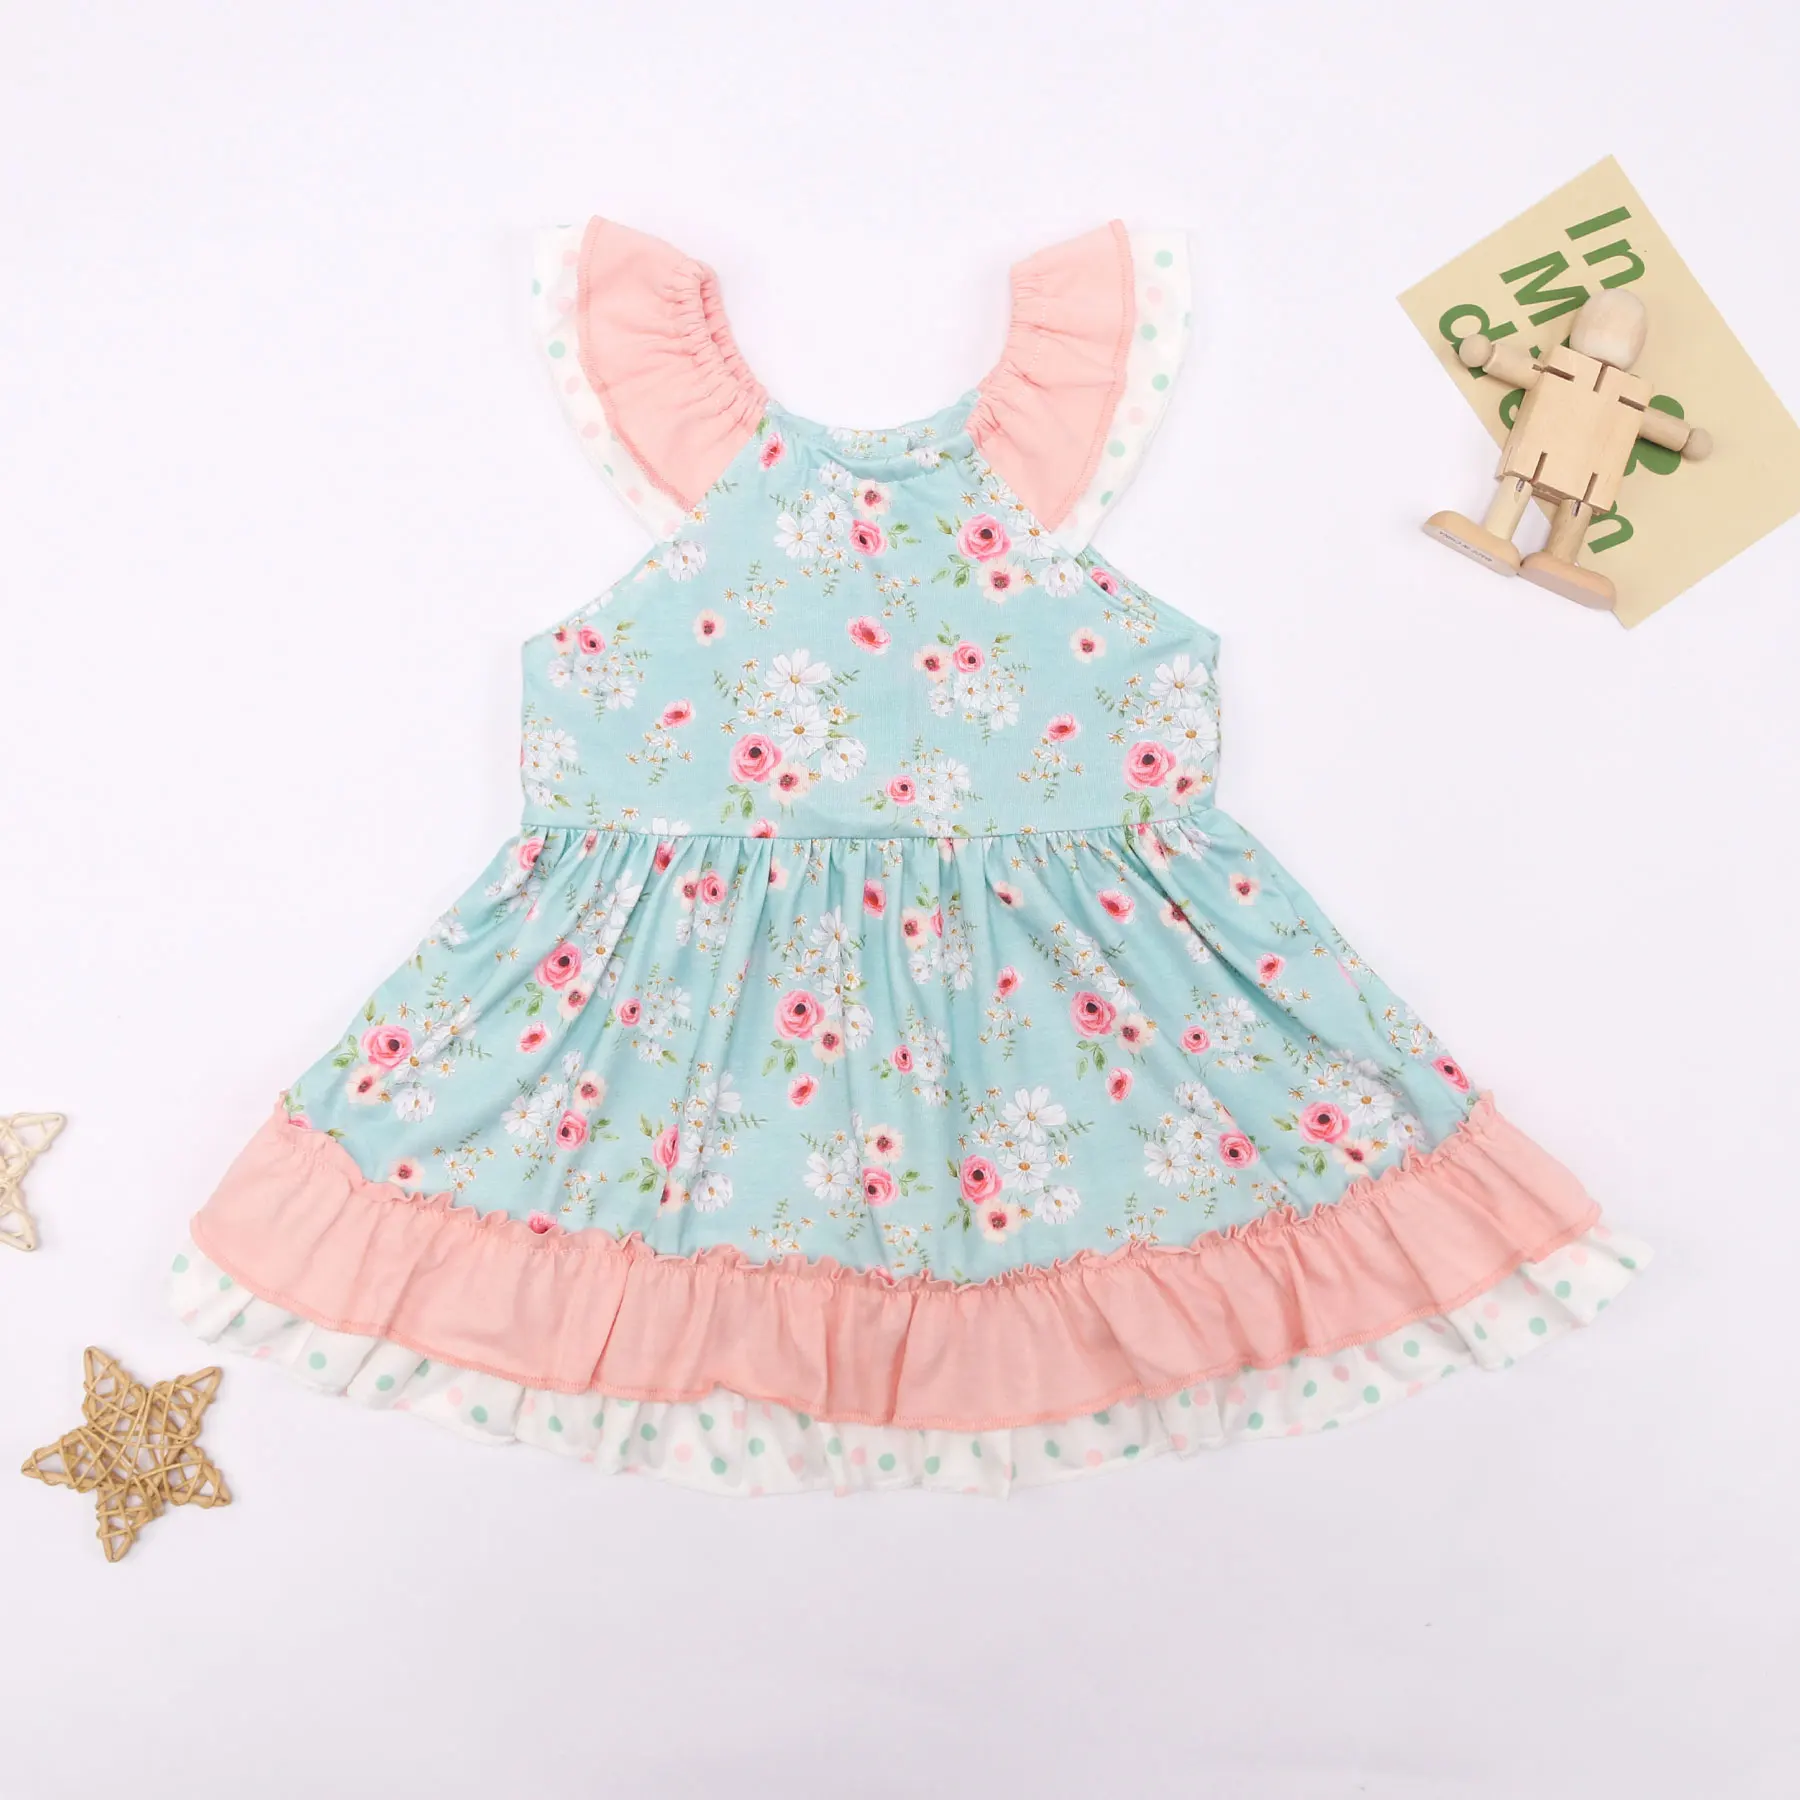 

New Arriving Casual Wear Toddler Petticoat Baby Girls Clothes Dress 1-8T Sleeveless Outfits Pink Bodysuit Princess Flower Skirt